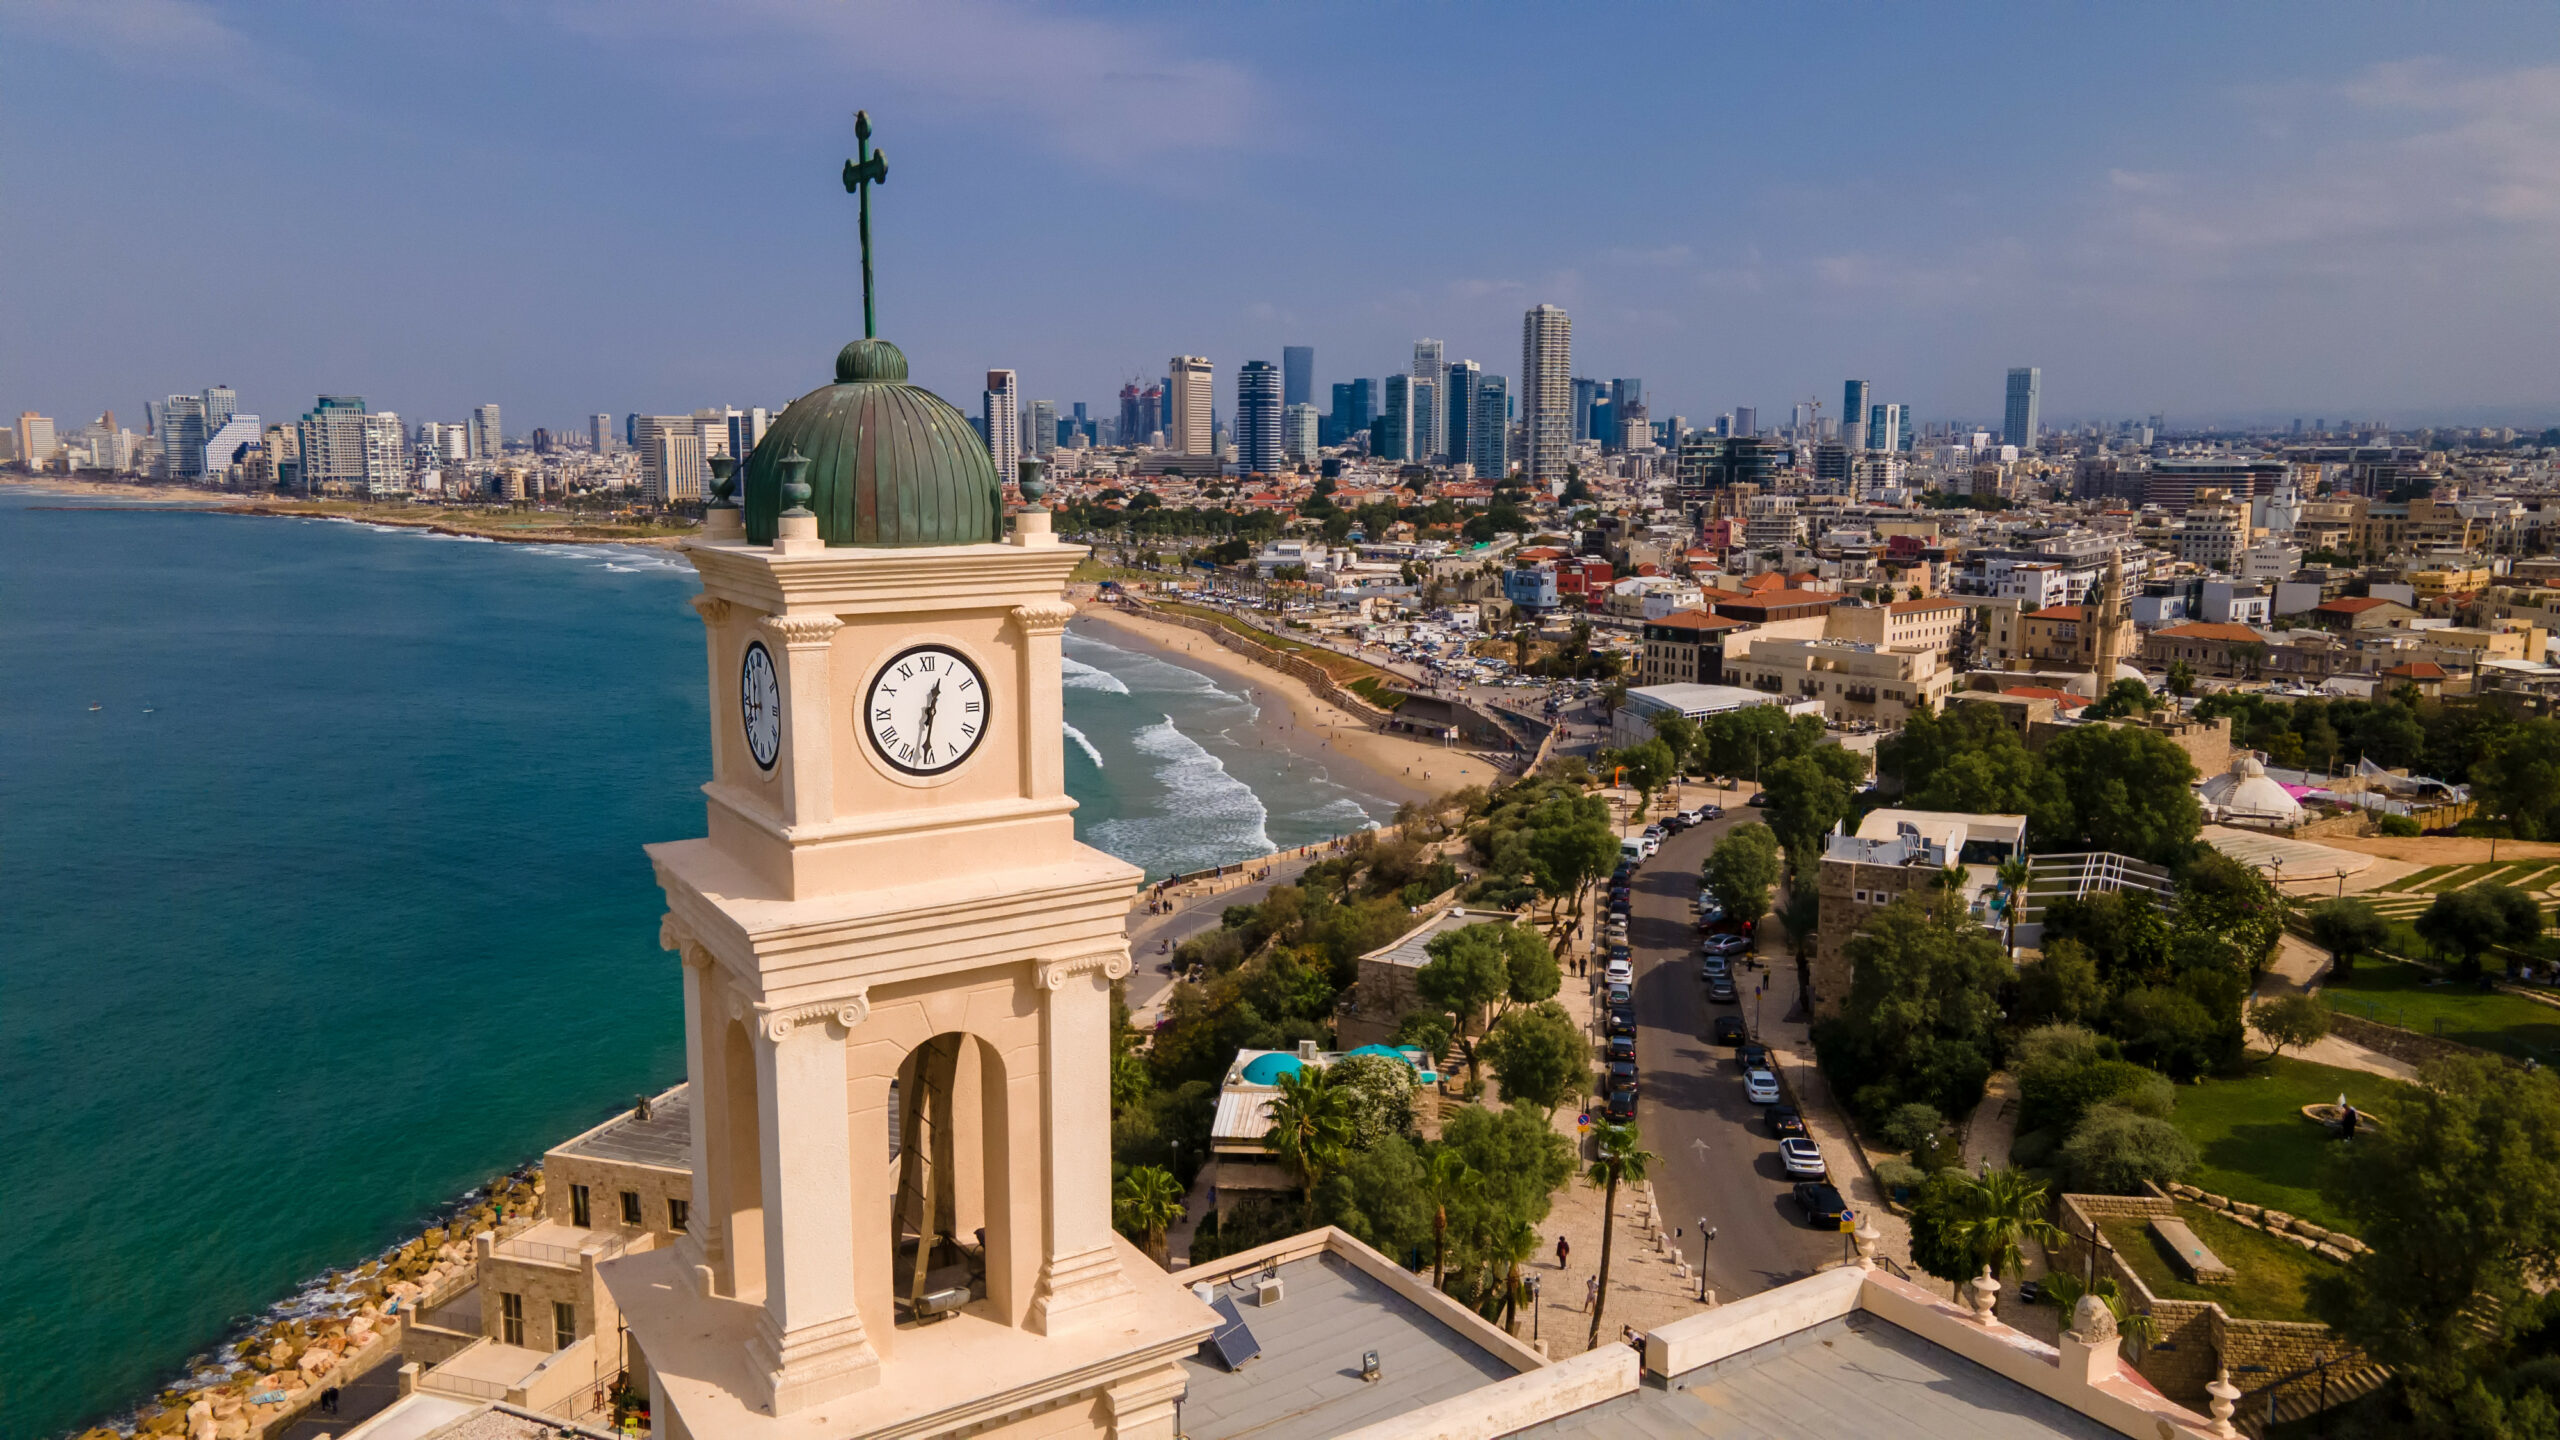 Belltower, Jaffa, Tel Aviv, Israel, Aerial view. Modern city with skyscrapers and the old city. Bird's eye view